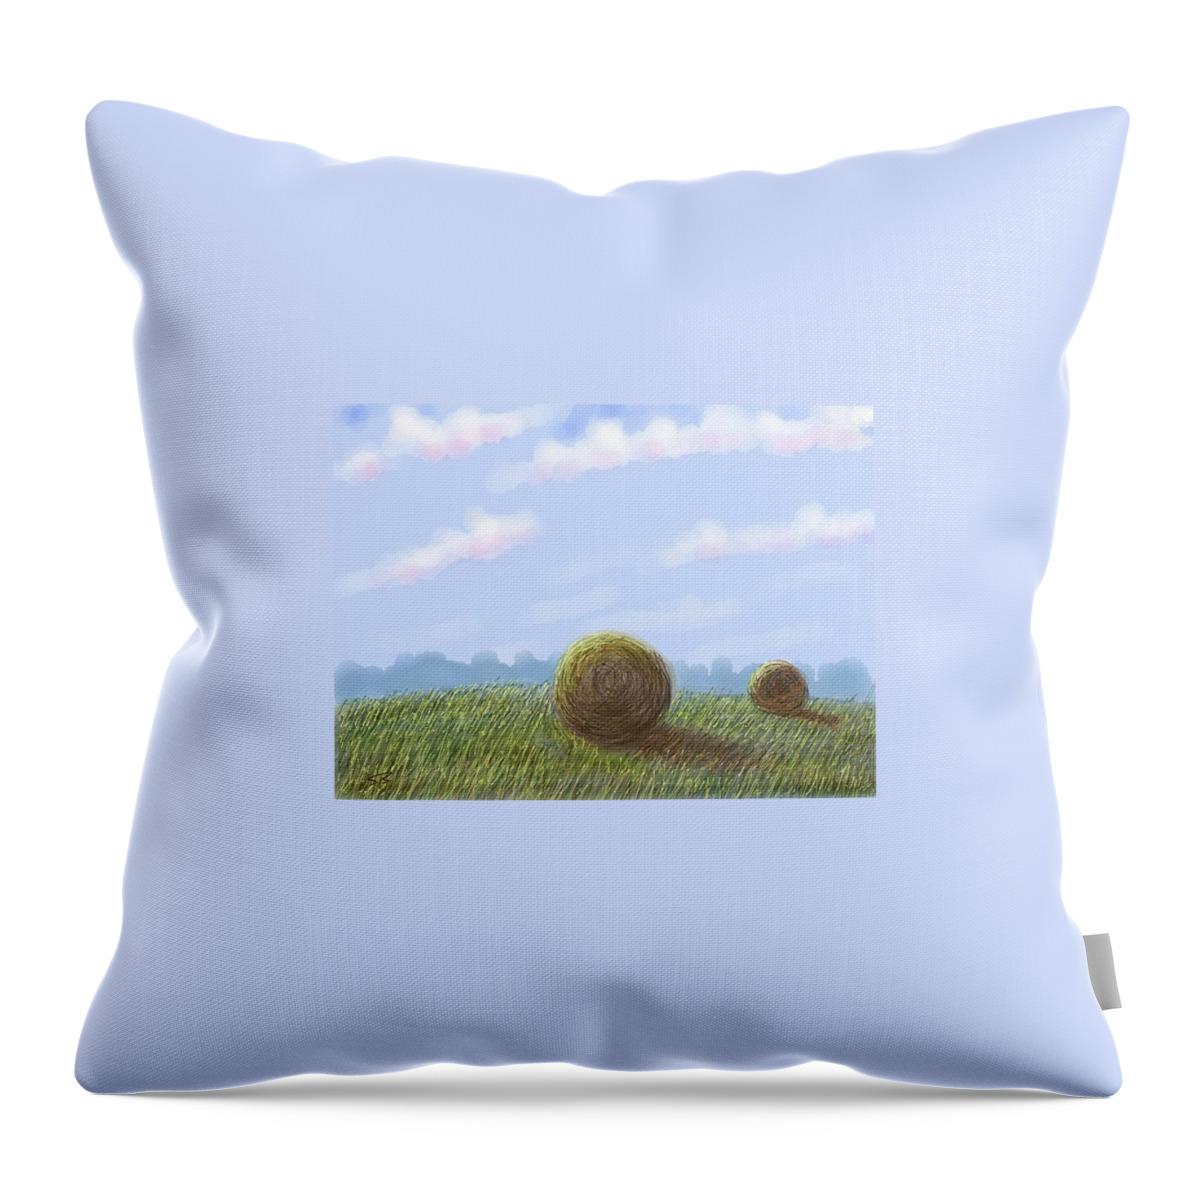 Hay Throw Pillow featuring the digital art Hey I See Hay by Stacy C Bottoms